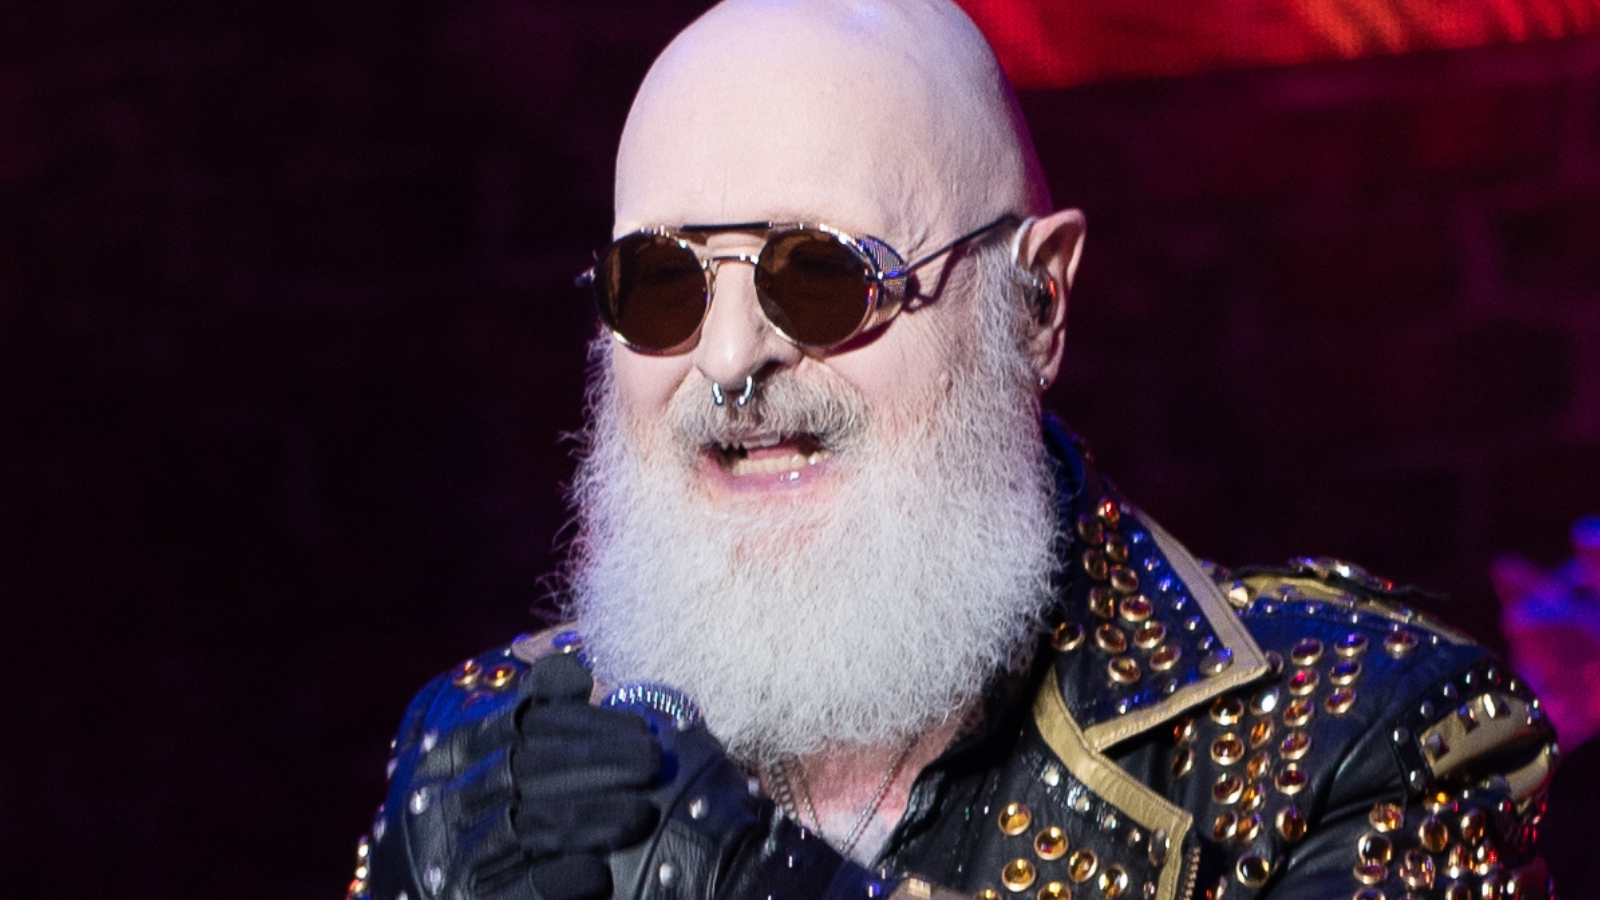 Rob Halford's Leather and Studs Ensemble